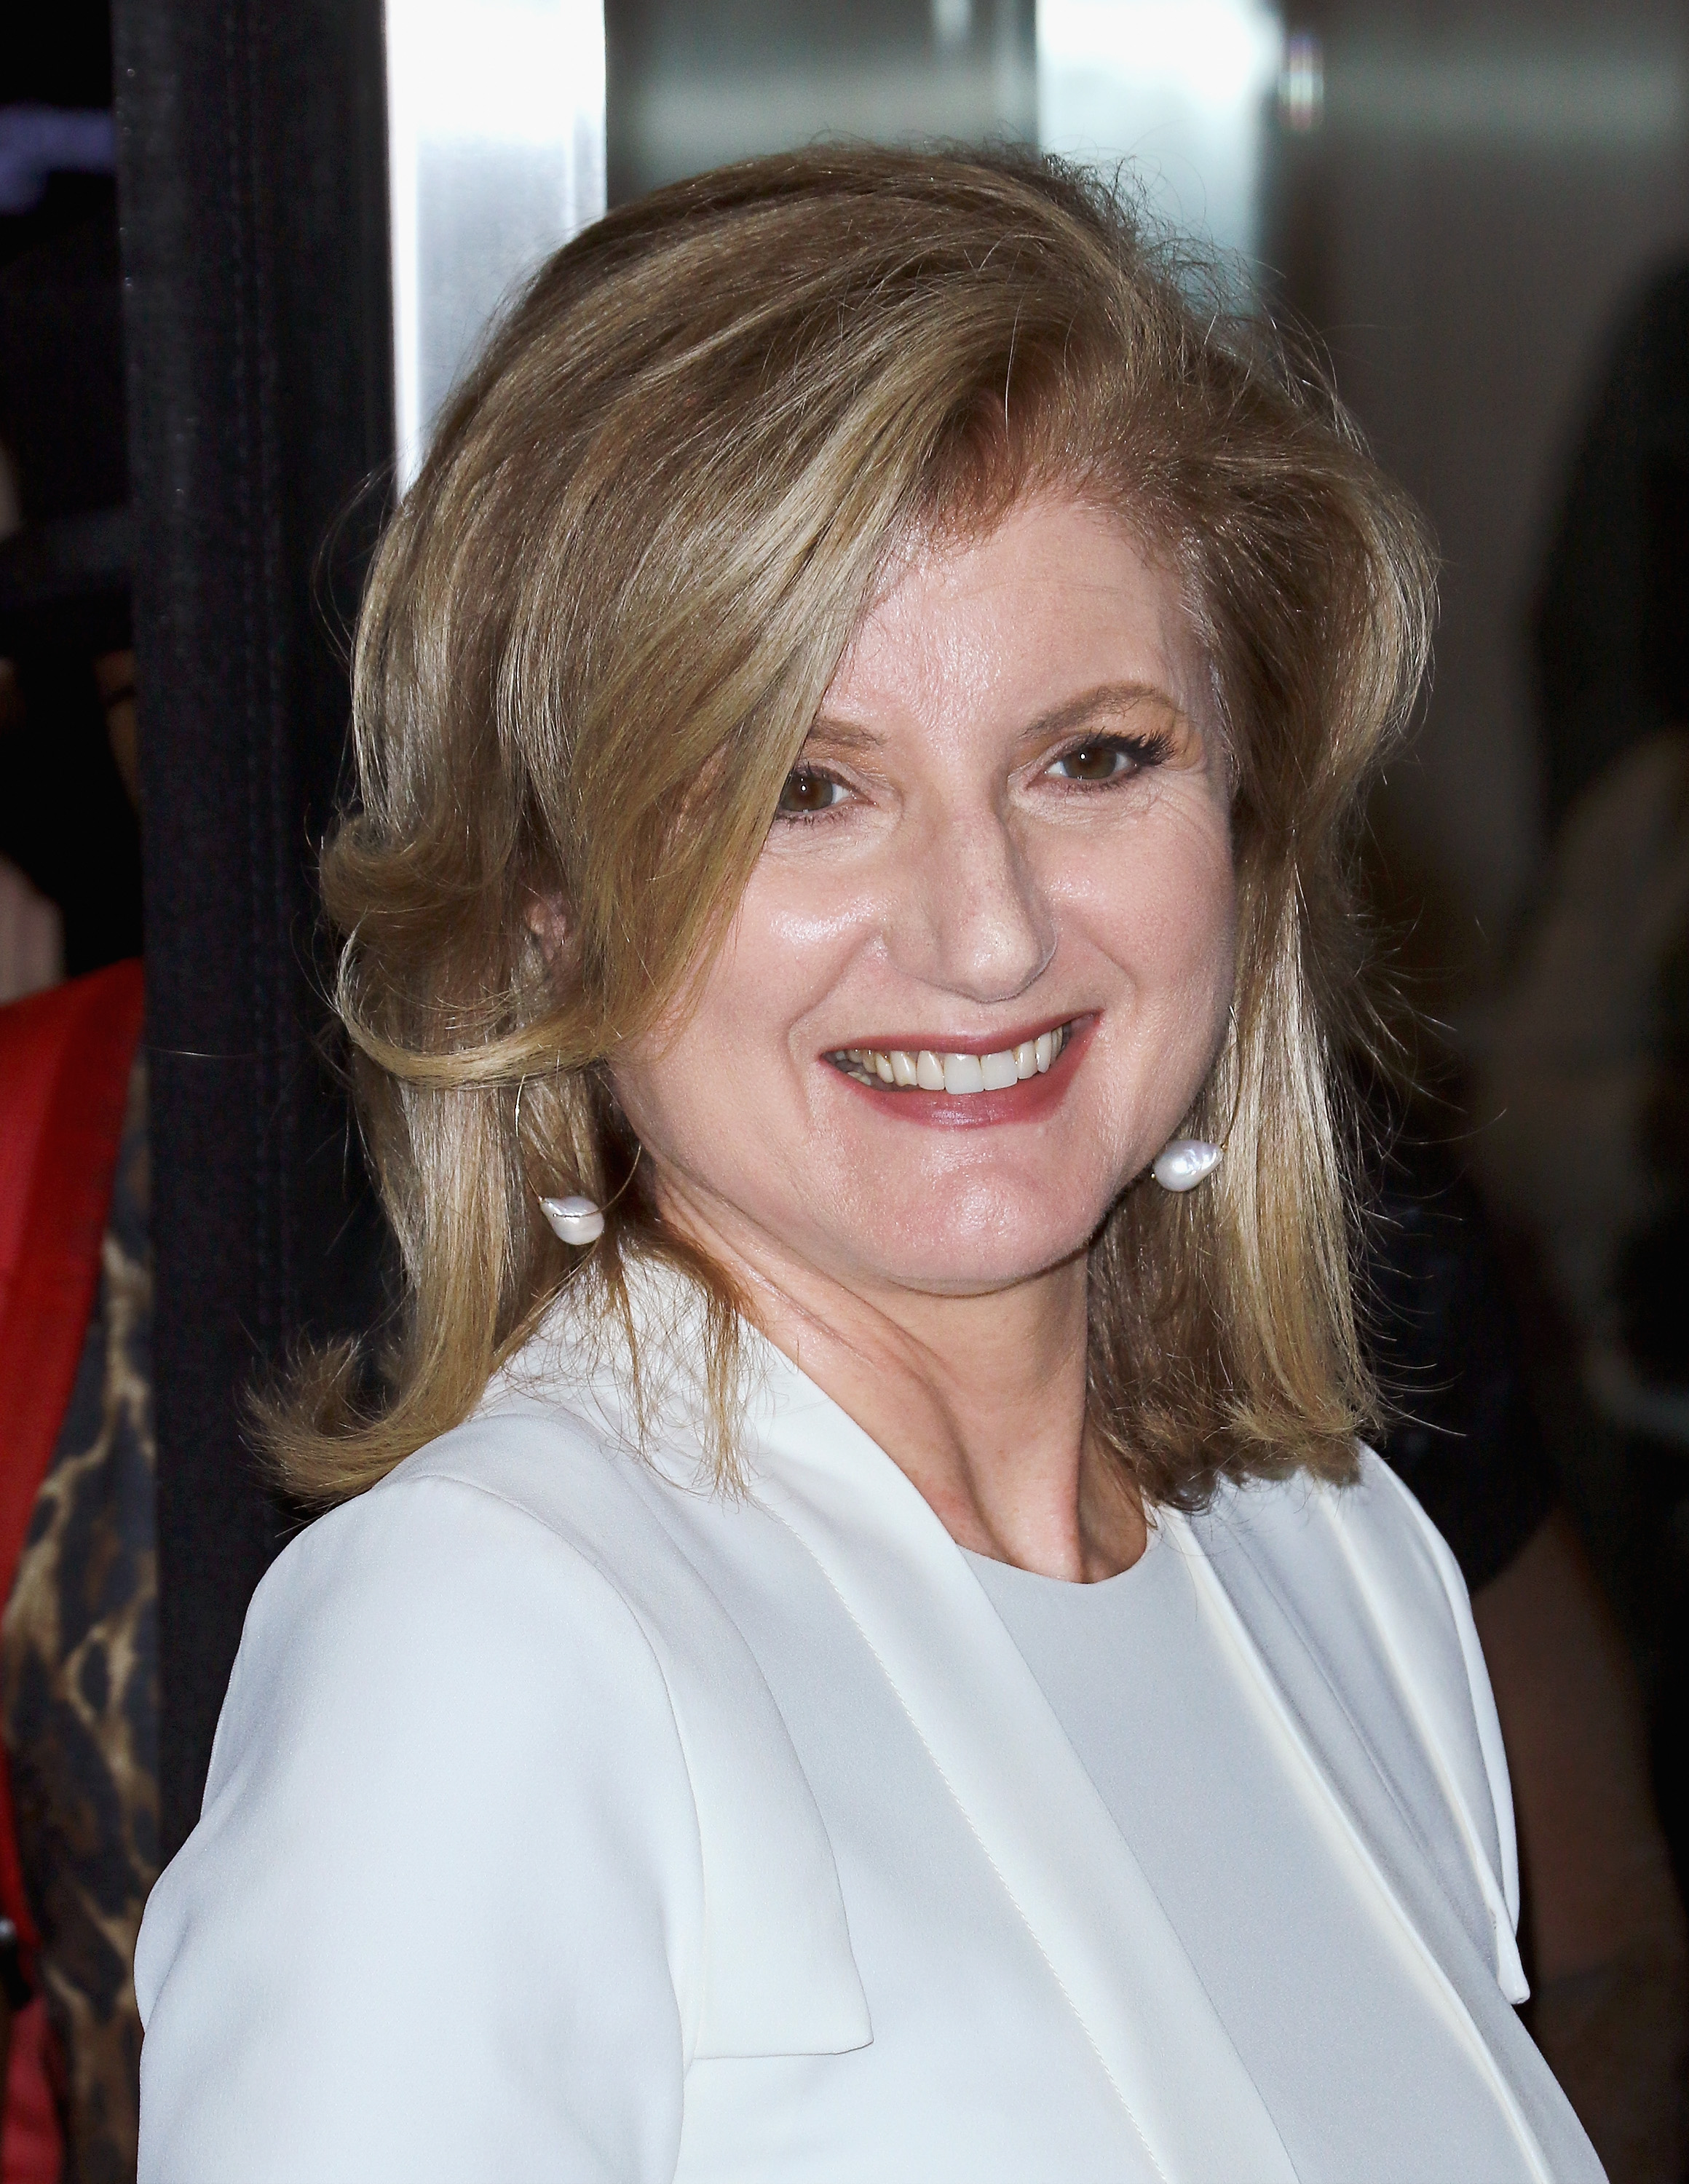 Arianna Huffington at a screening of "Irrational Man" in New York City on July 15, 2015.